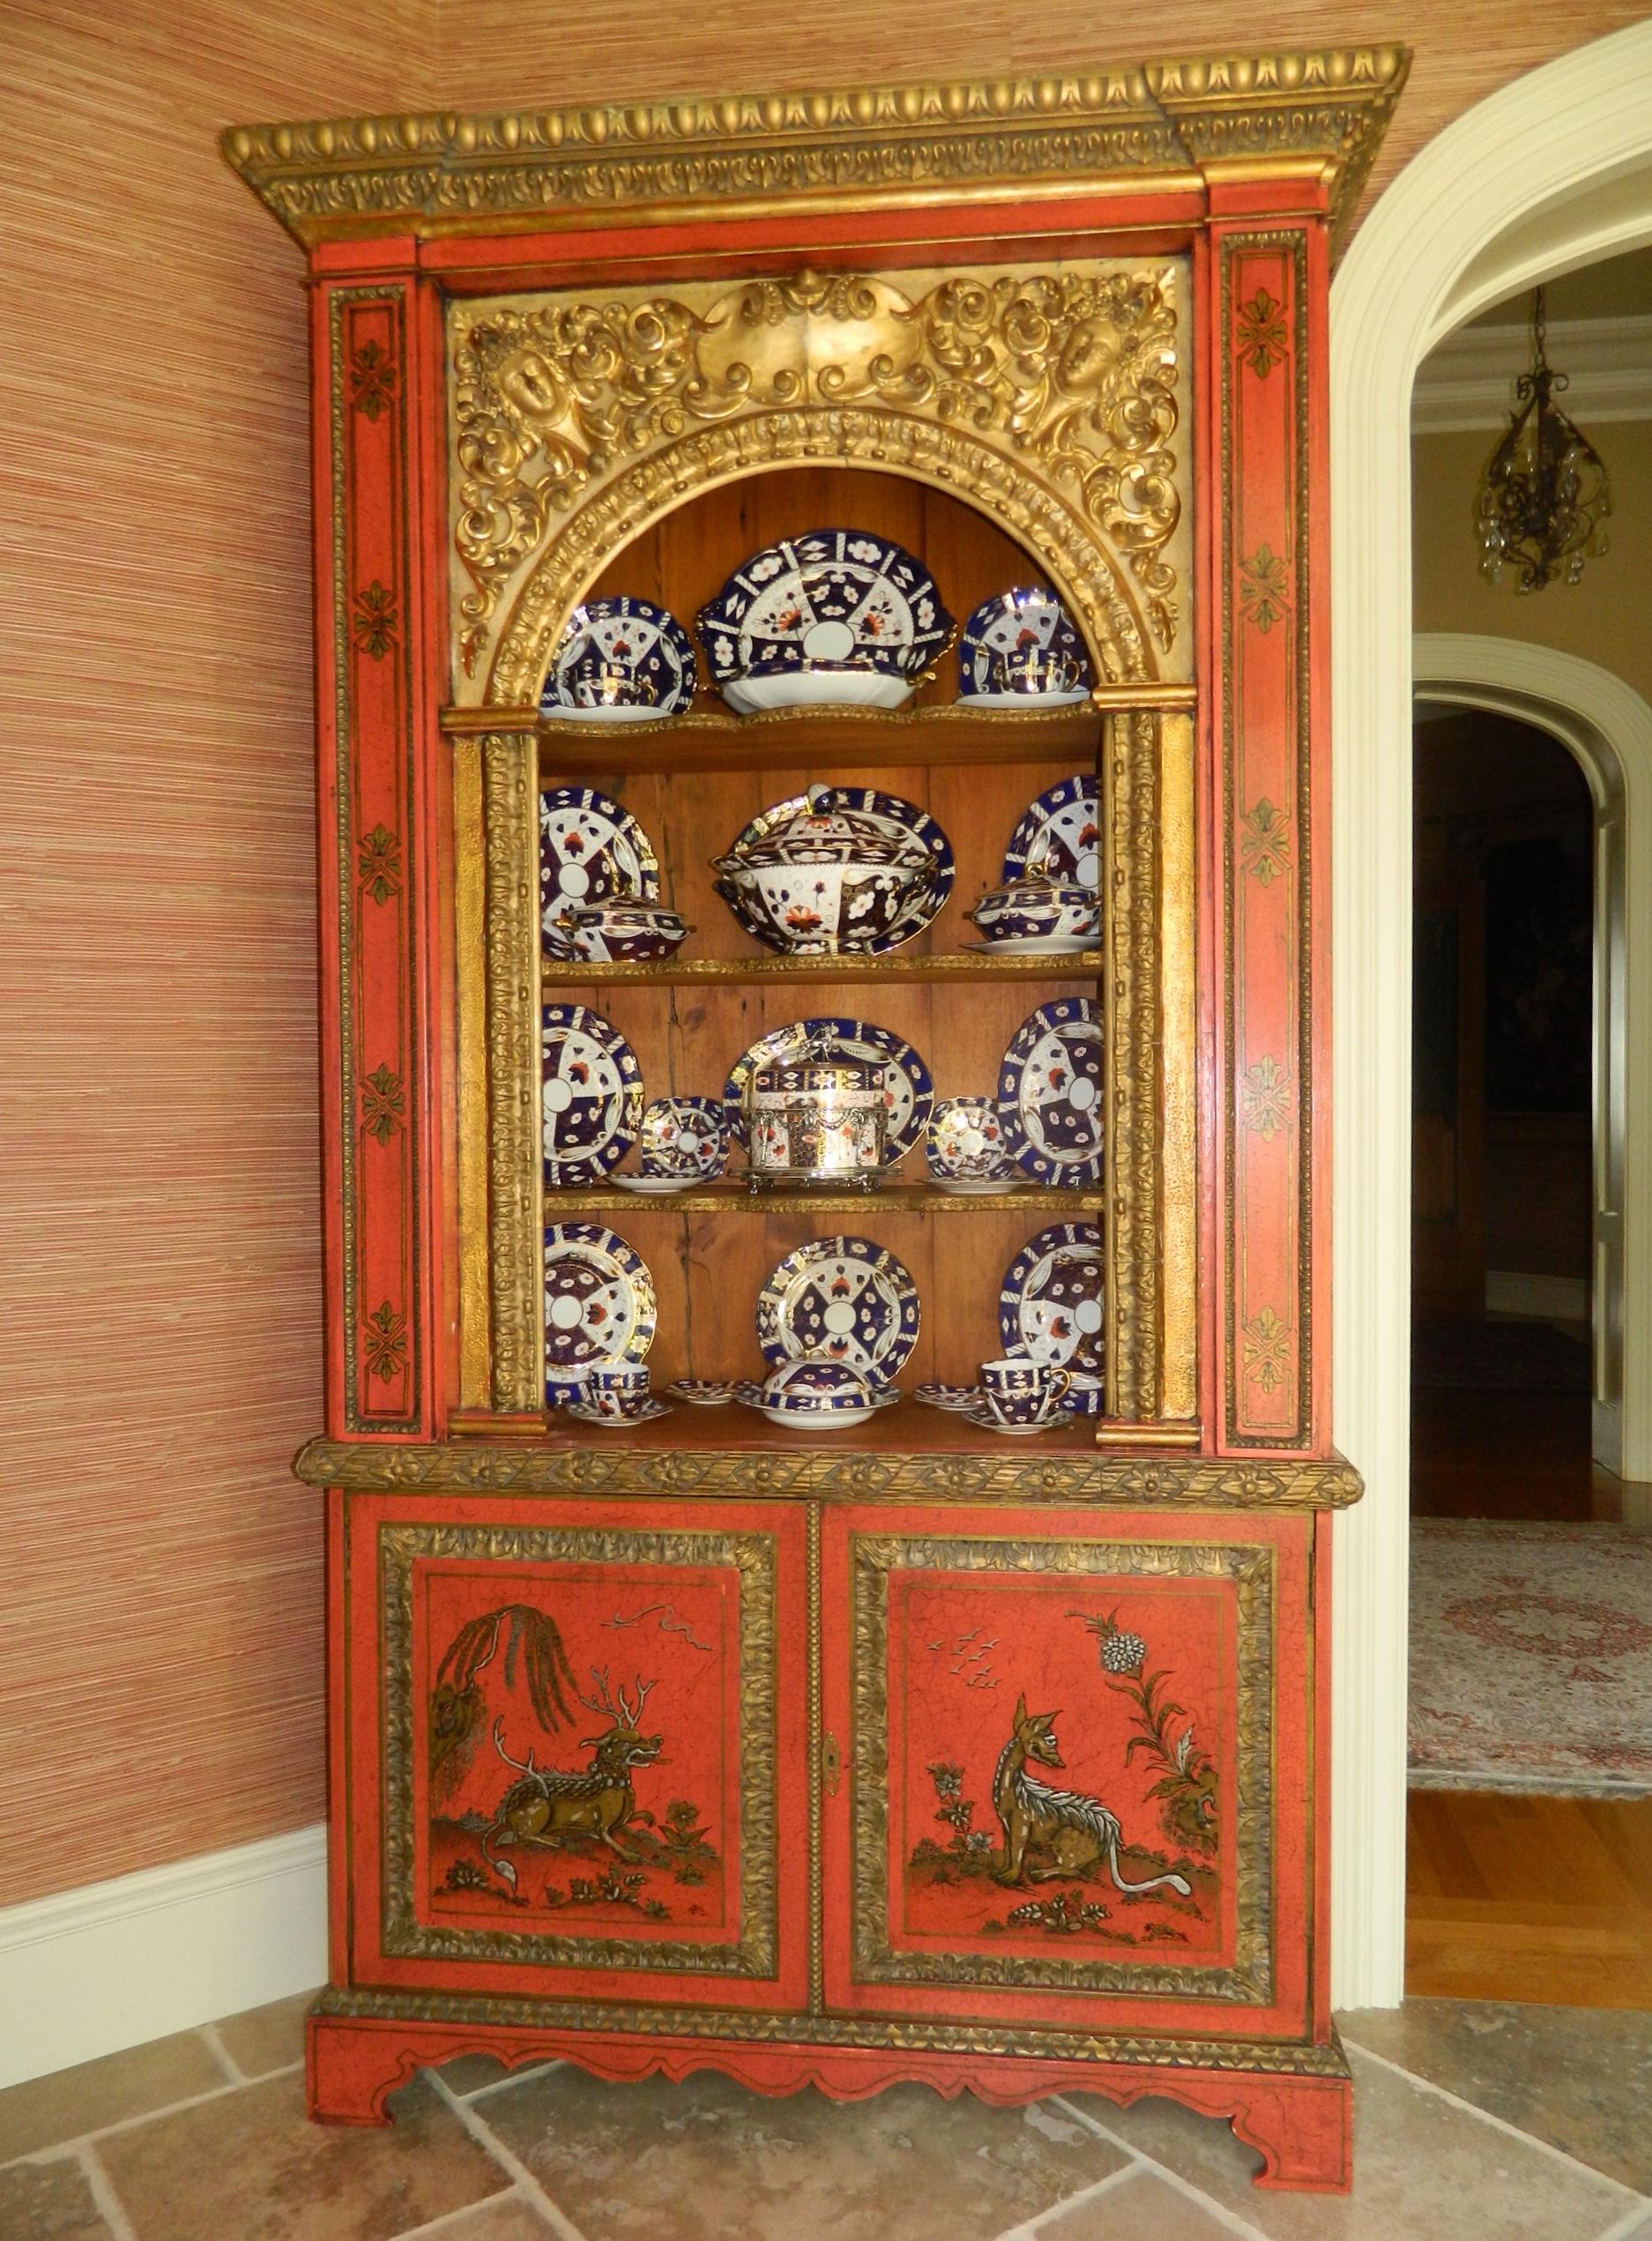 Pair of English painted and gold cabinets in the chinoiserie style, Early 20th century. Dishes are not included.